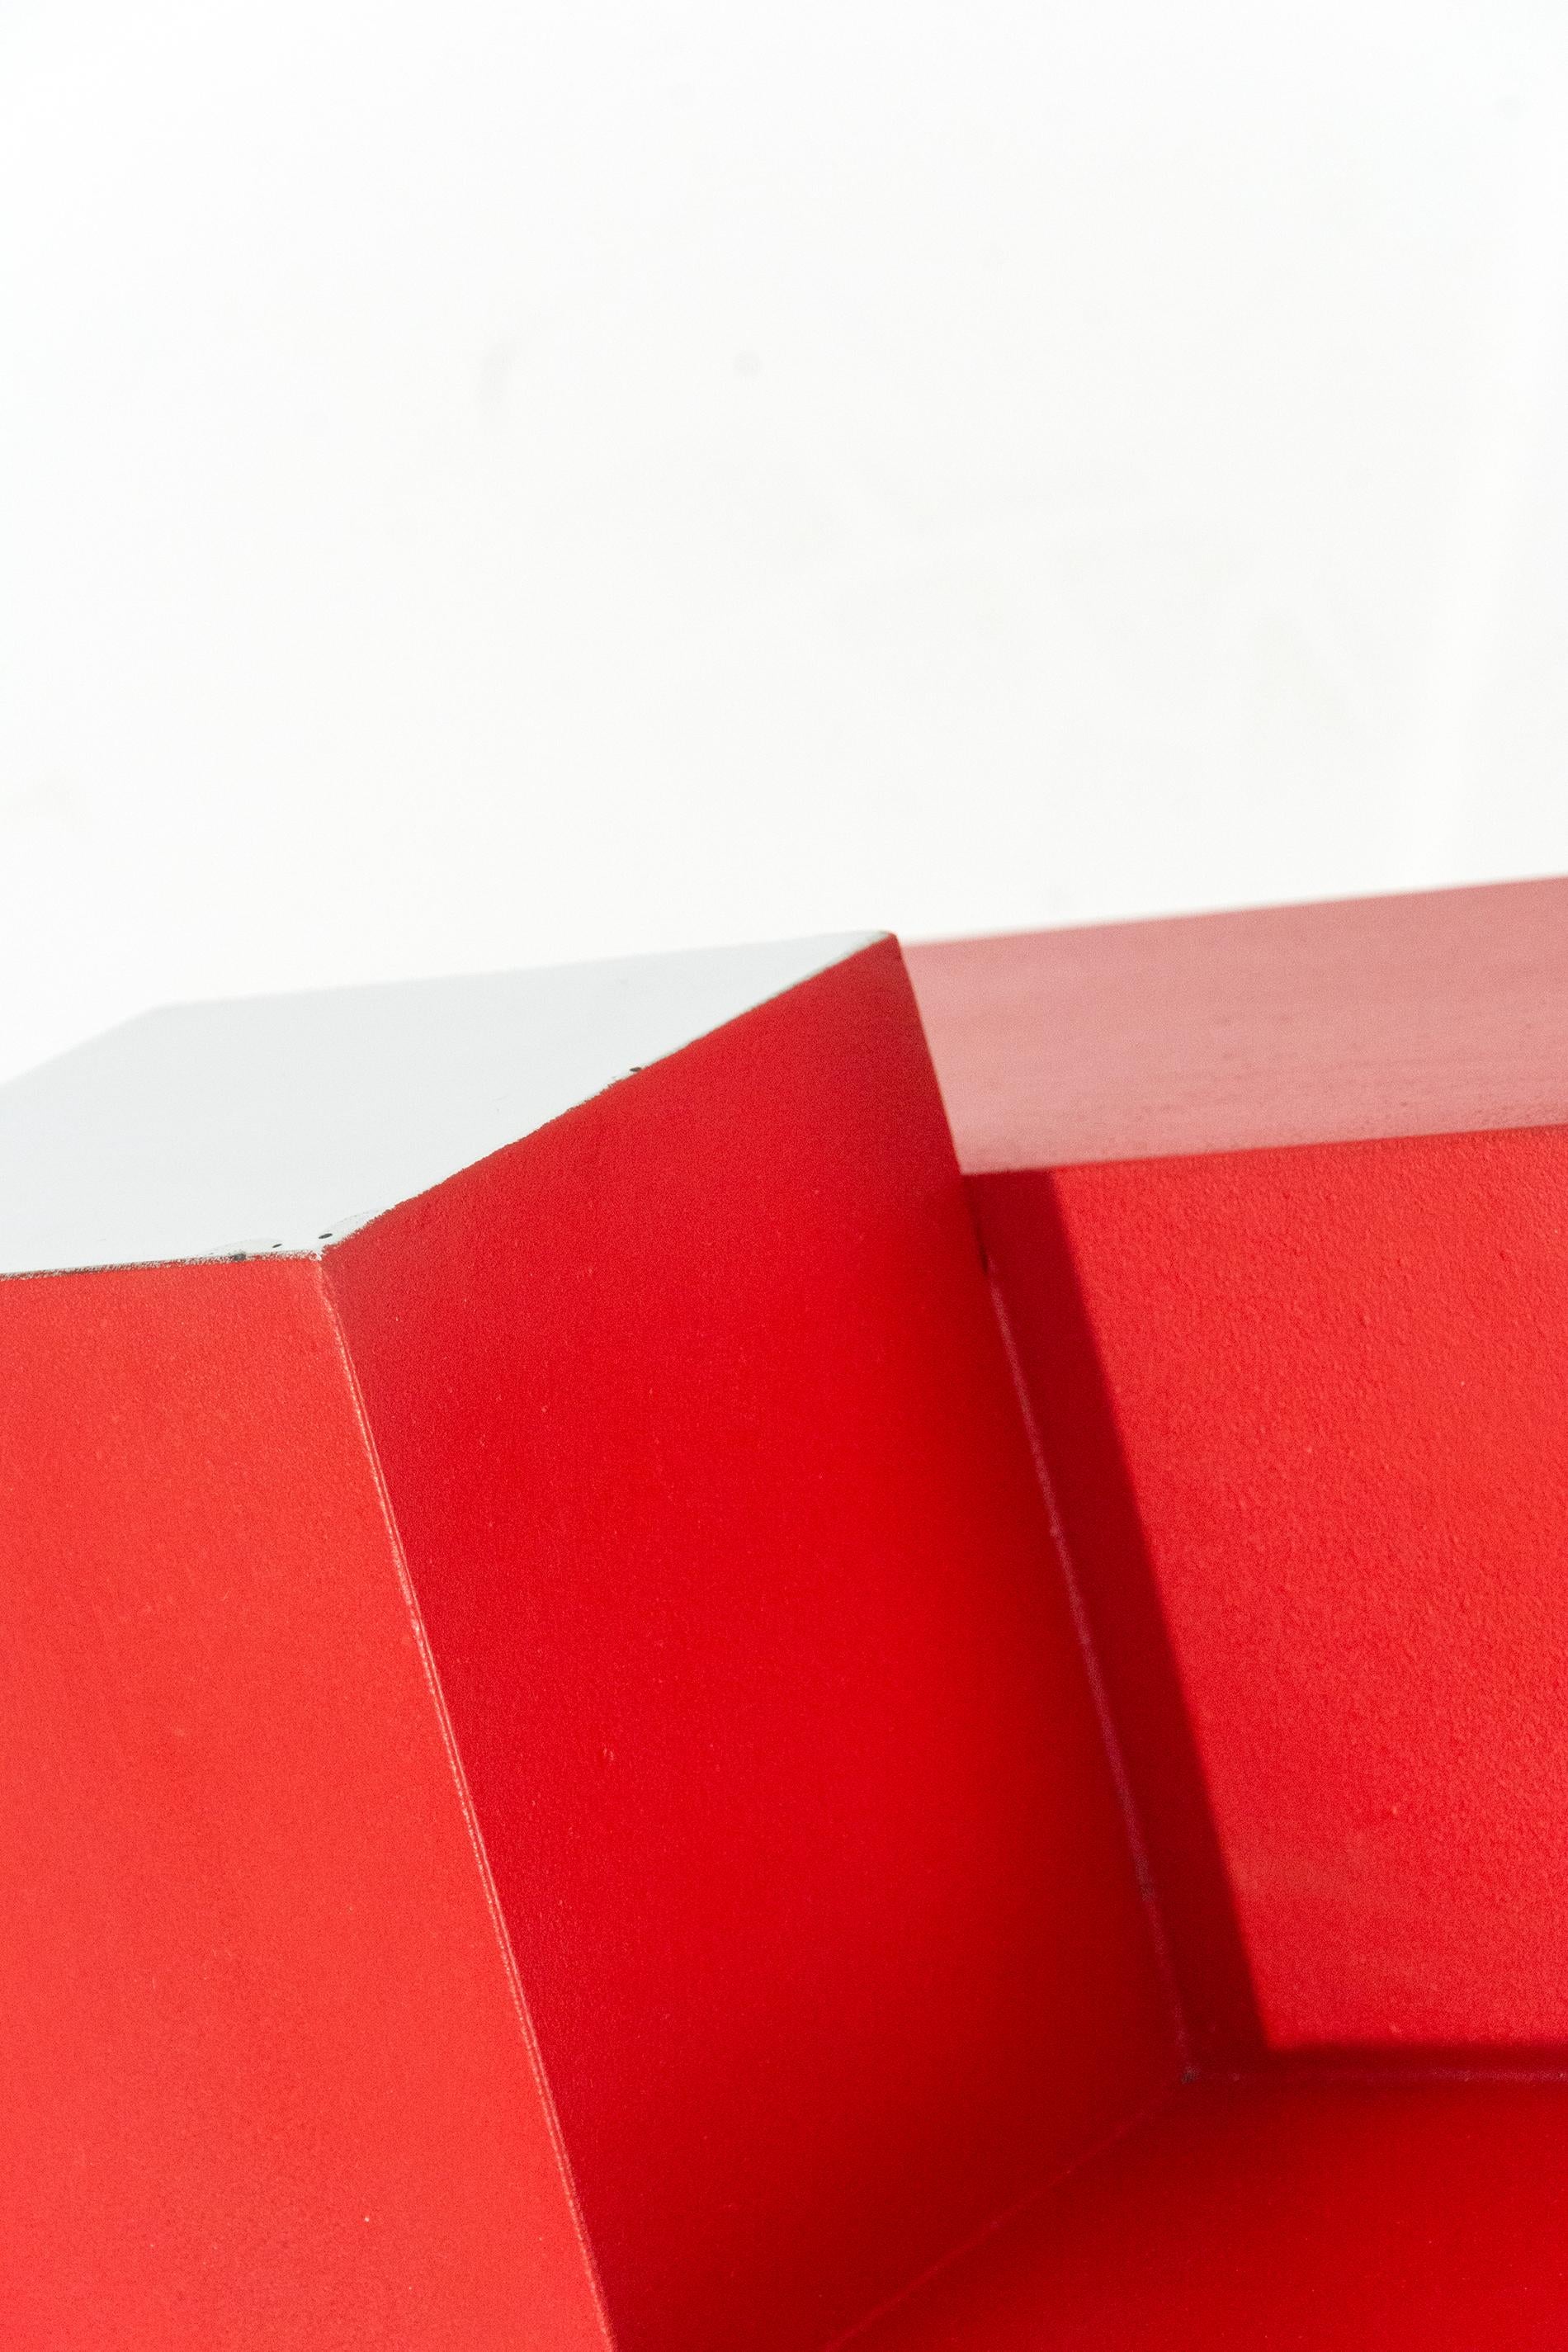 12 Inch Cube Red 1/10 1